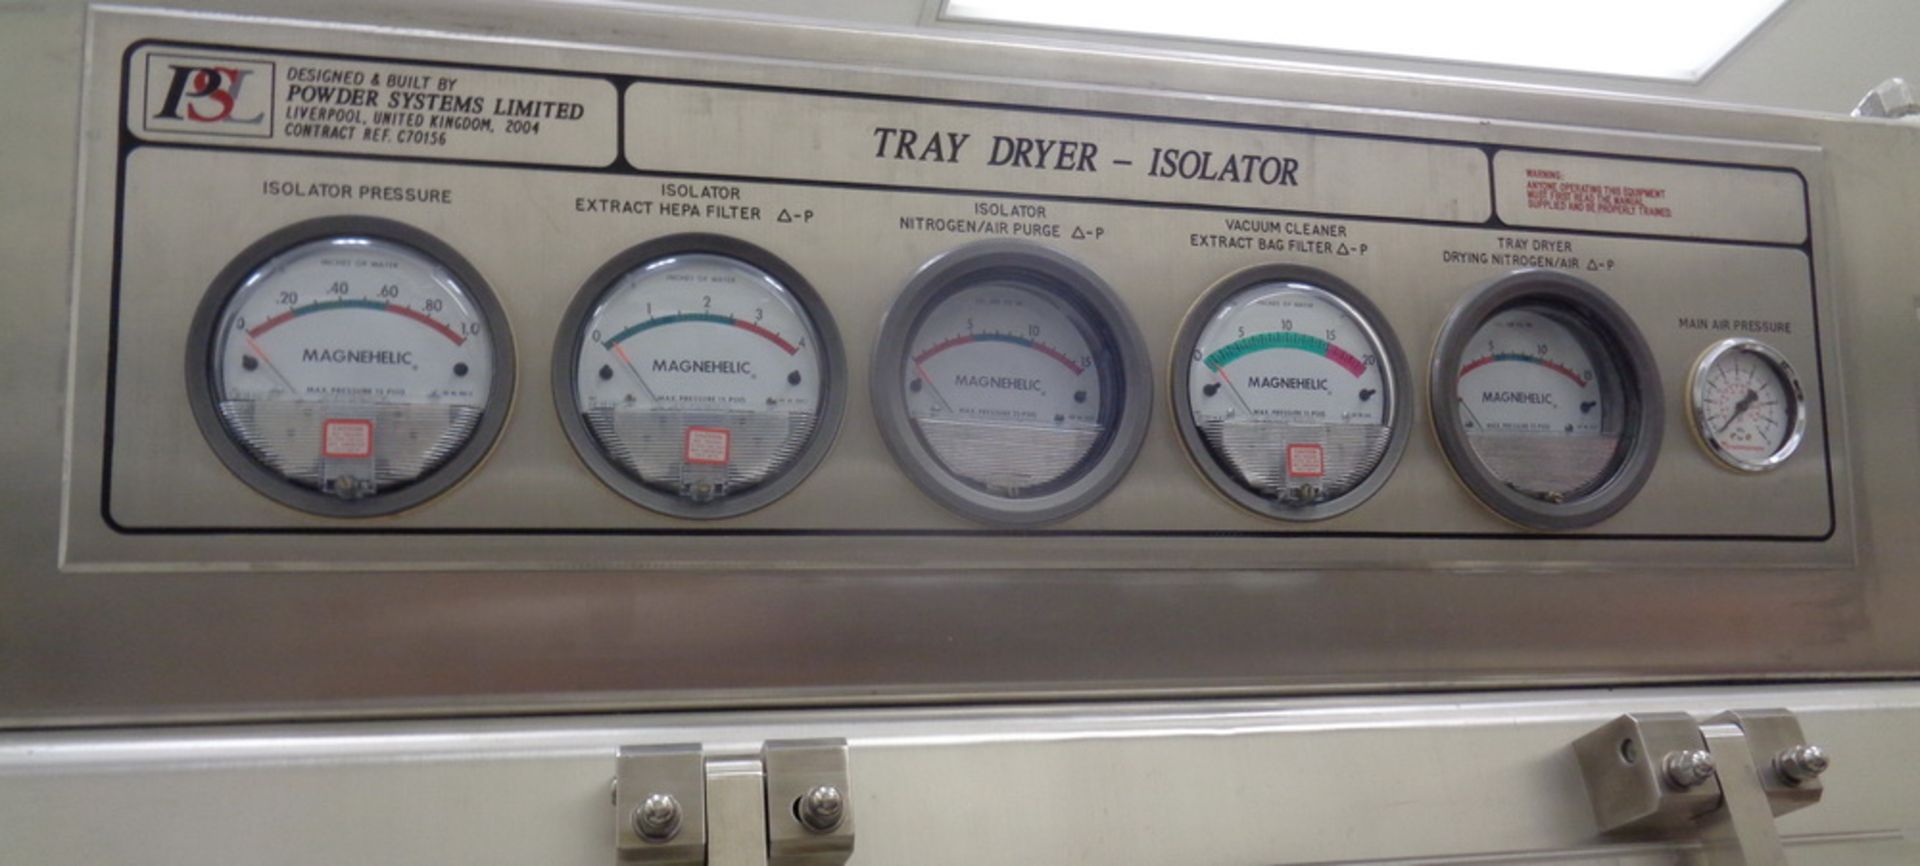 Powder Systems Limited(PSL) Tray Dryer Stainless Steel Isolator, complete with 4 tray oven - Image 8 of 14